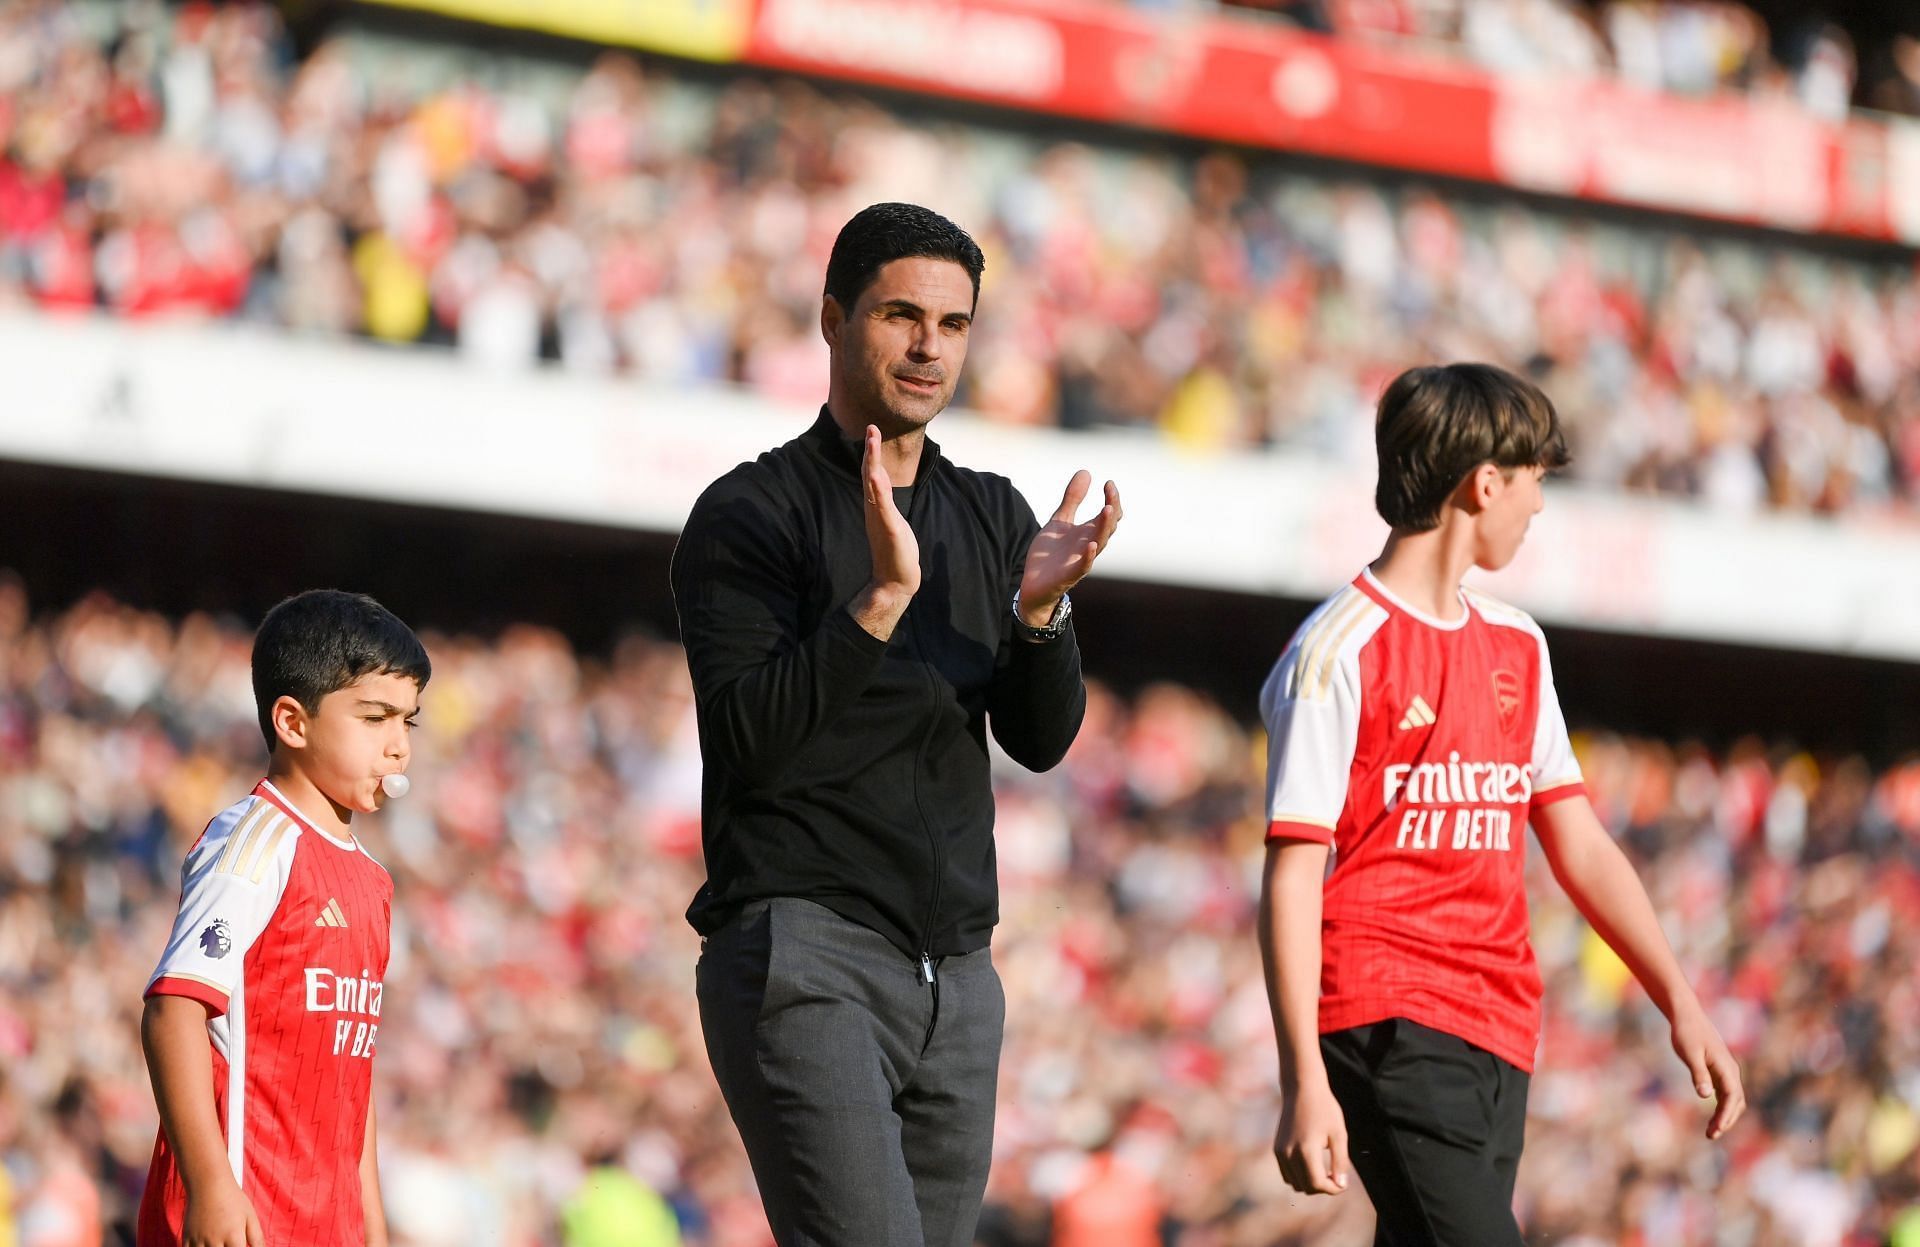 Arsenal manager Mikel Arteta has overseen massive improvements at the Emirates